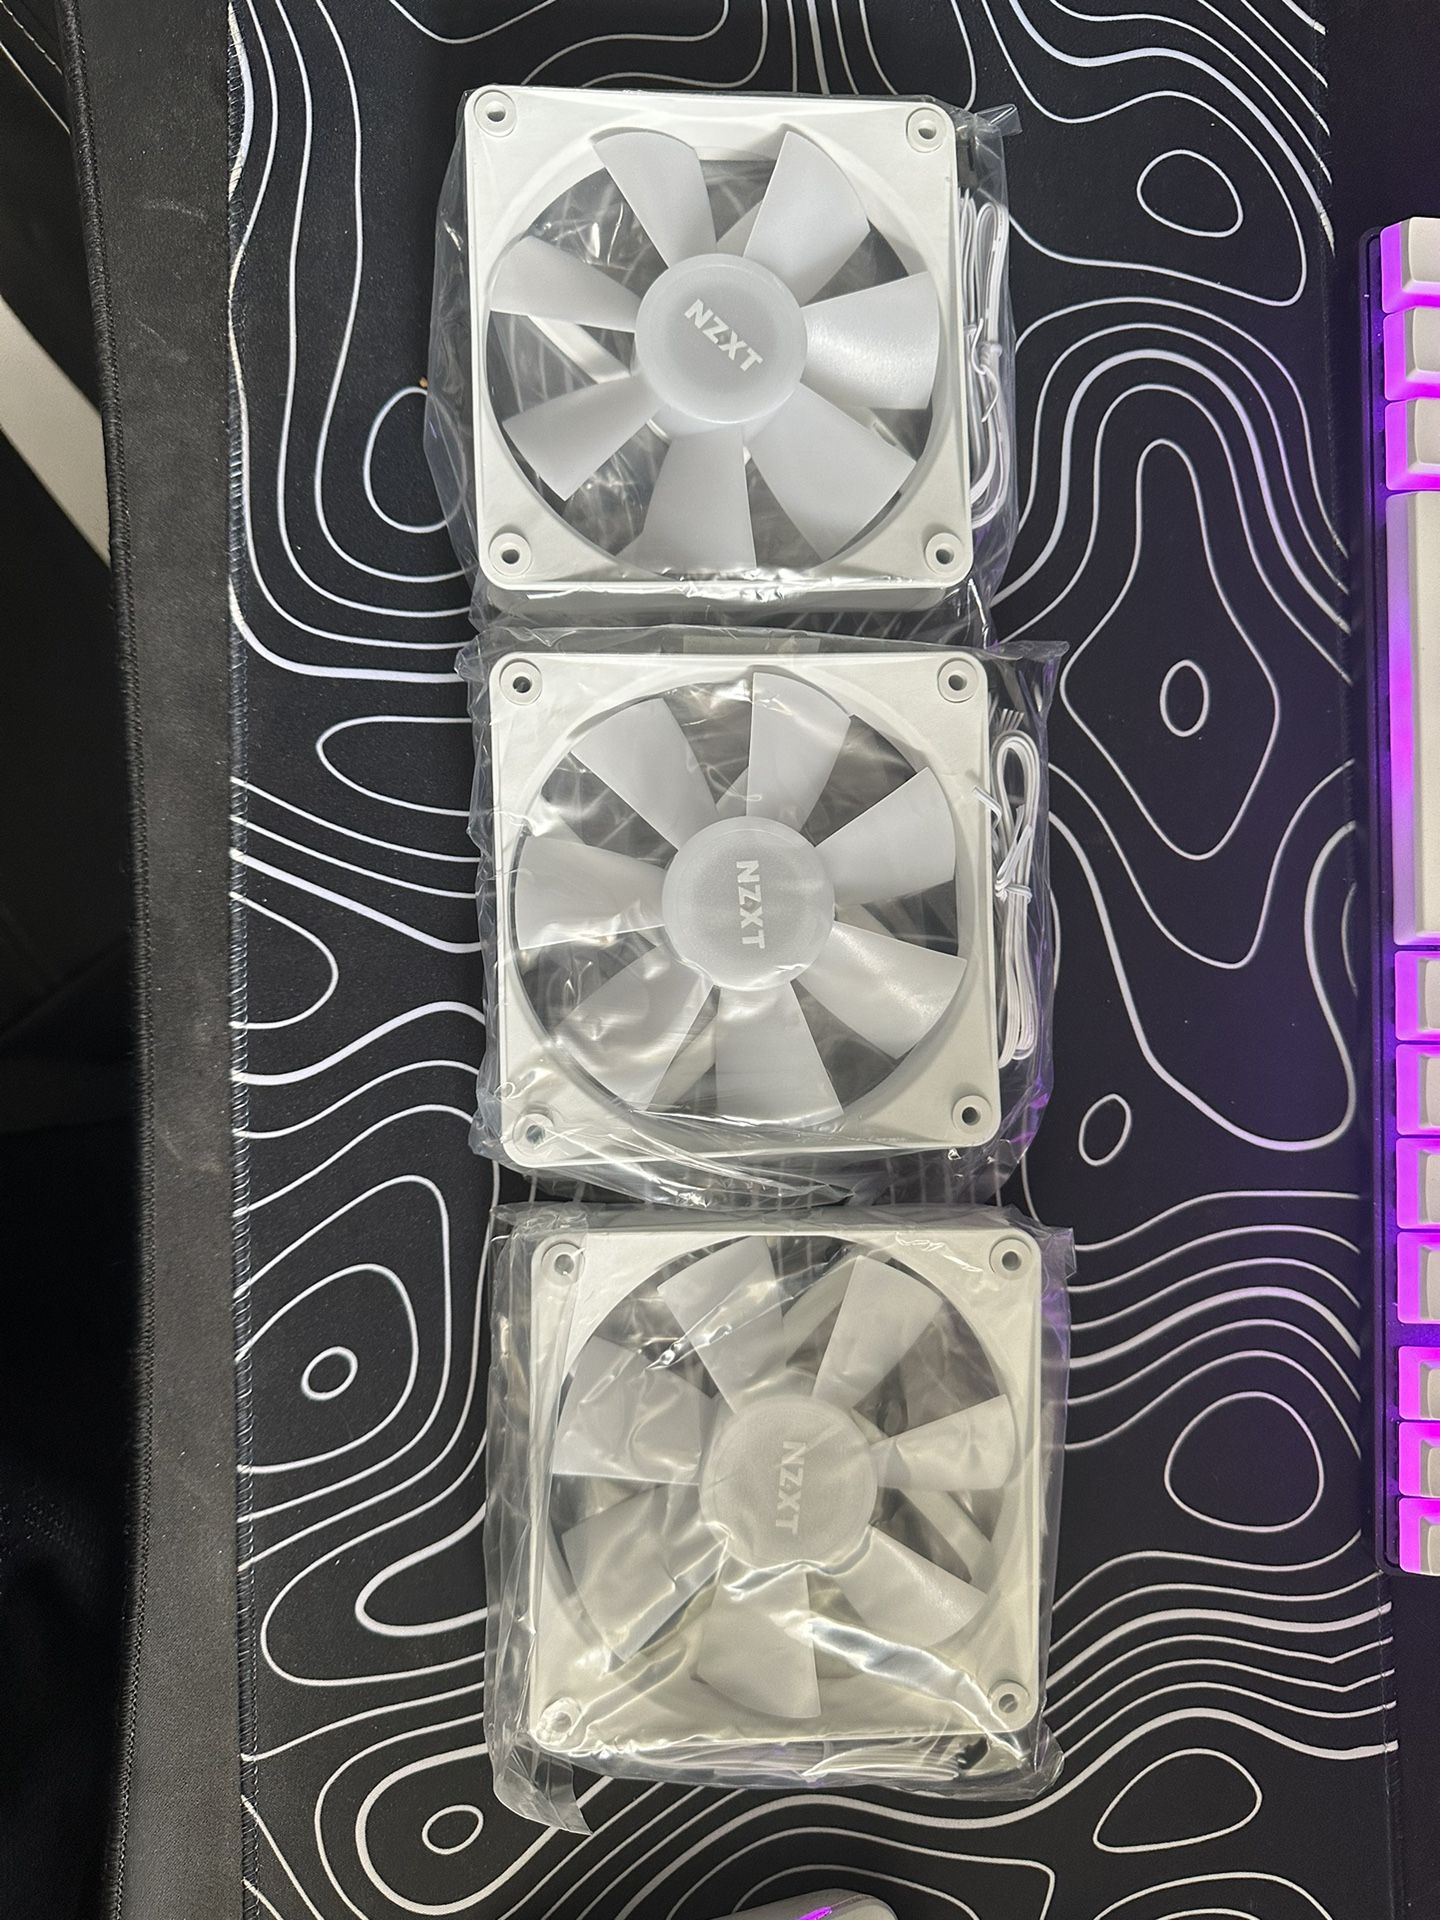 NZXT Fans (3 Pack) - 120mm - White 